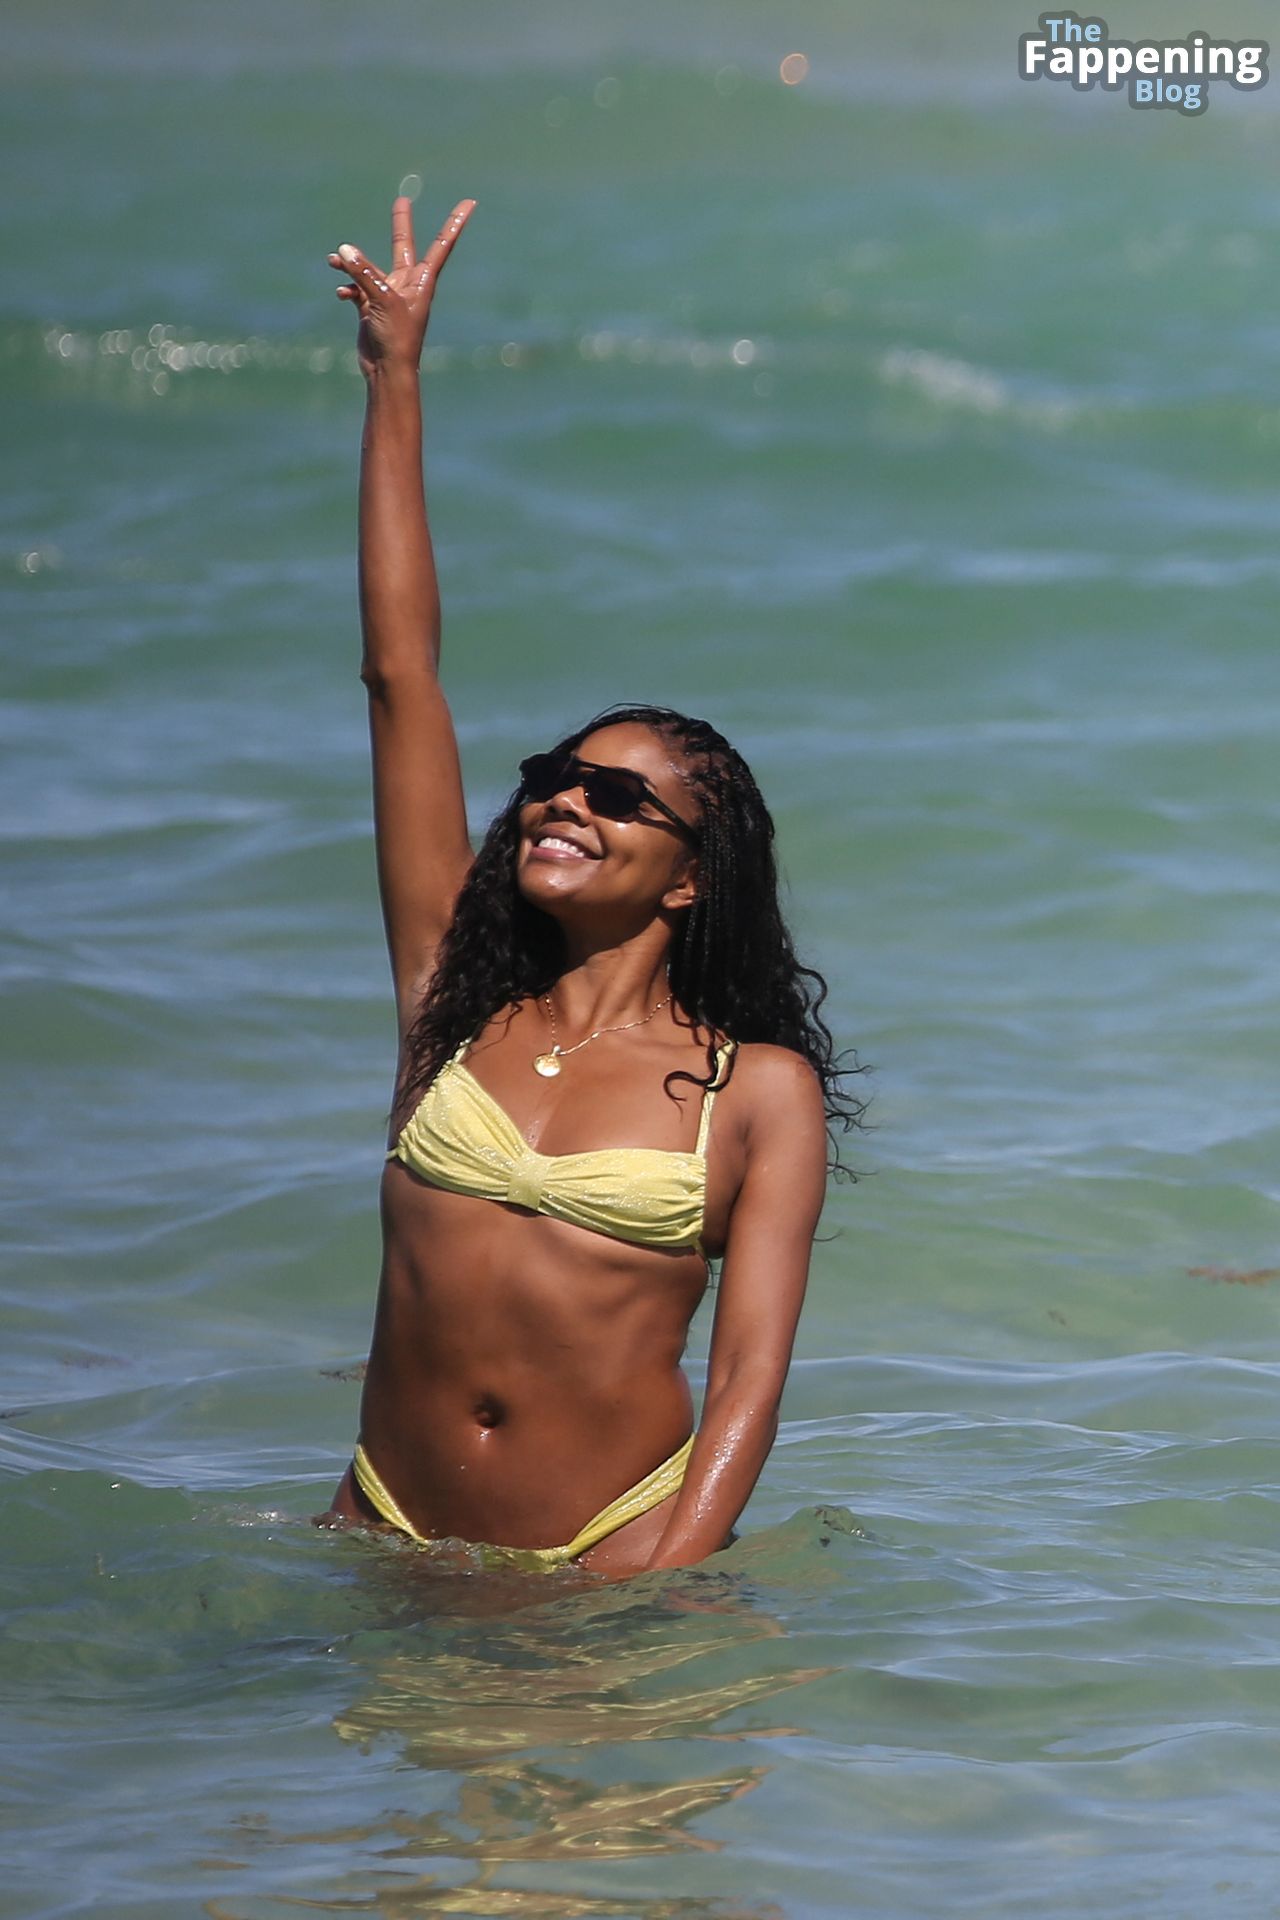 Gabrielle-Union-Sexy-The-Fappening-Blog-27.jpg